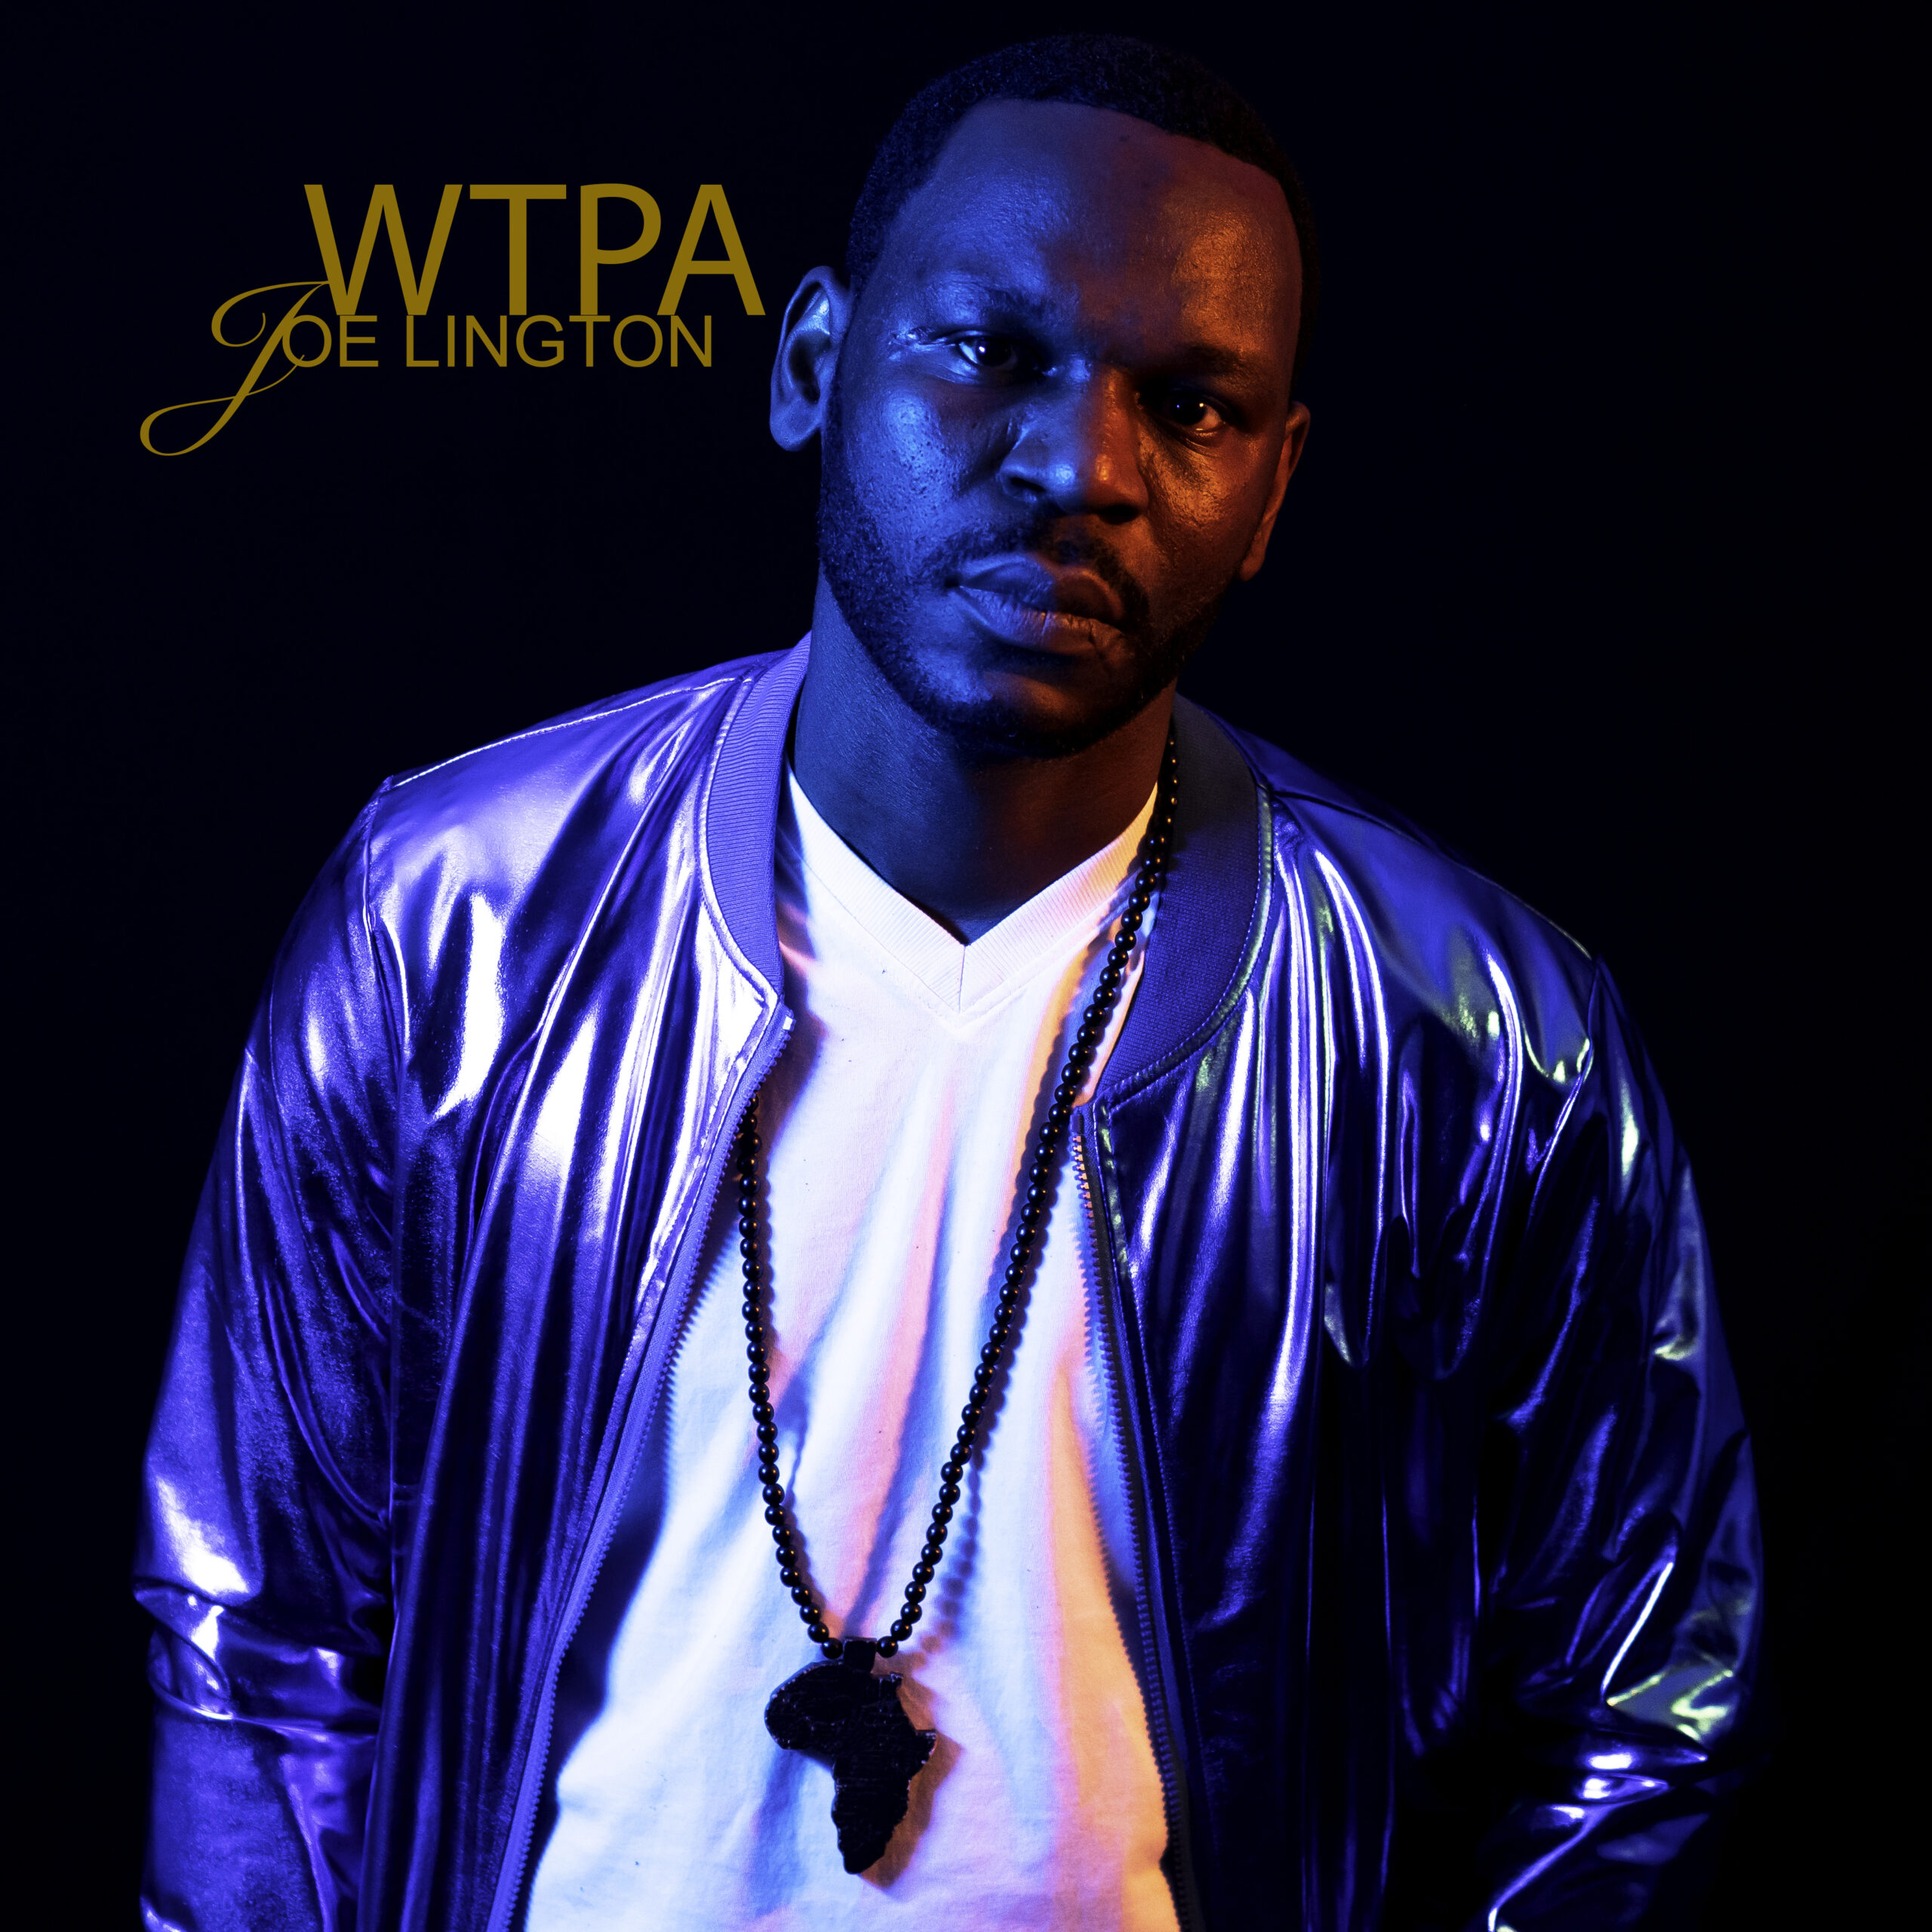 Joe Lington’s Soulful EP “WTPA” Sets the Stage for “Pinkeen”